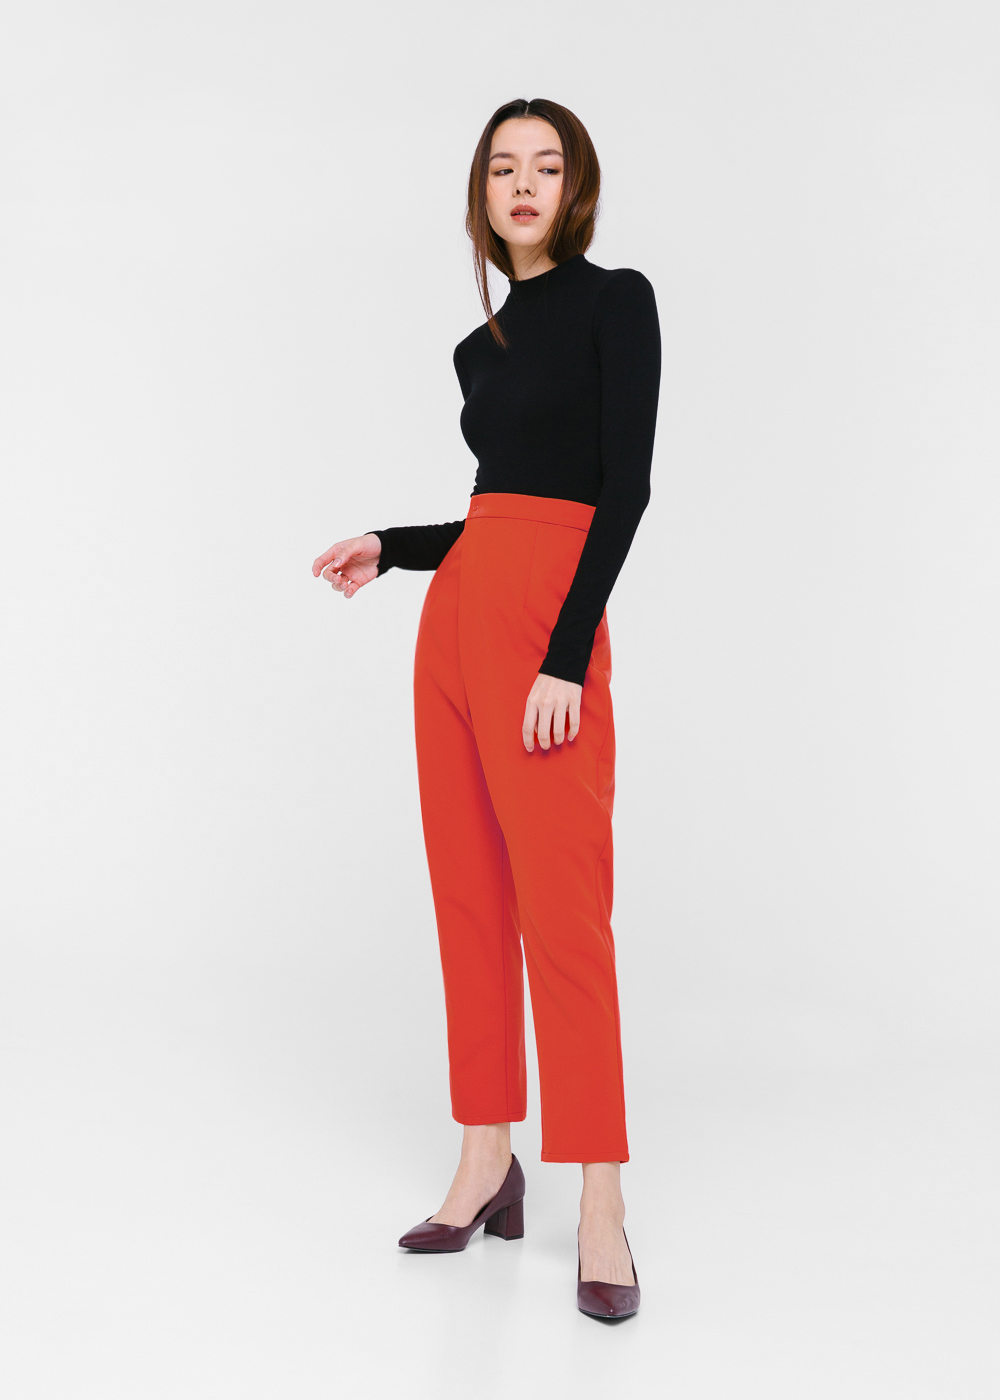 Buy Meisel Crossover High Waist Pants @ Love, Bonito Singapore